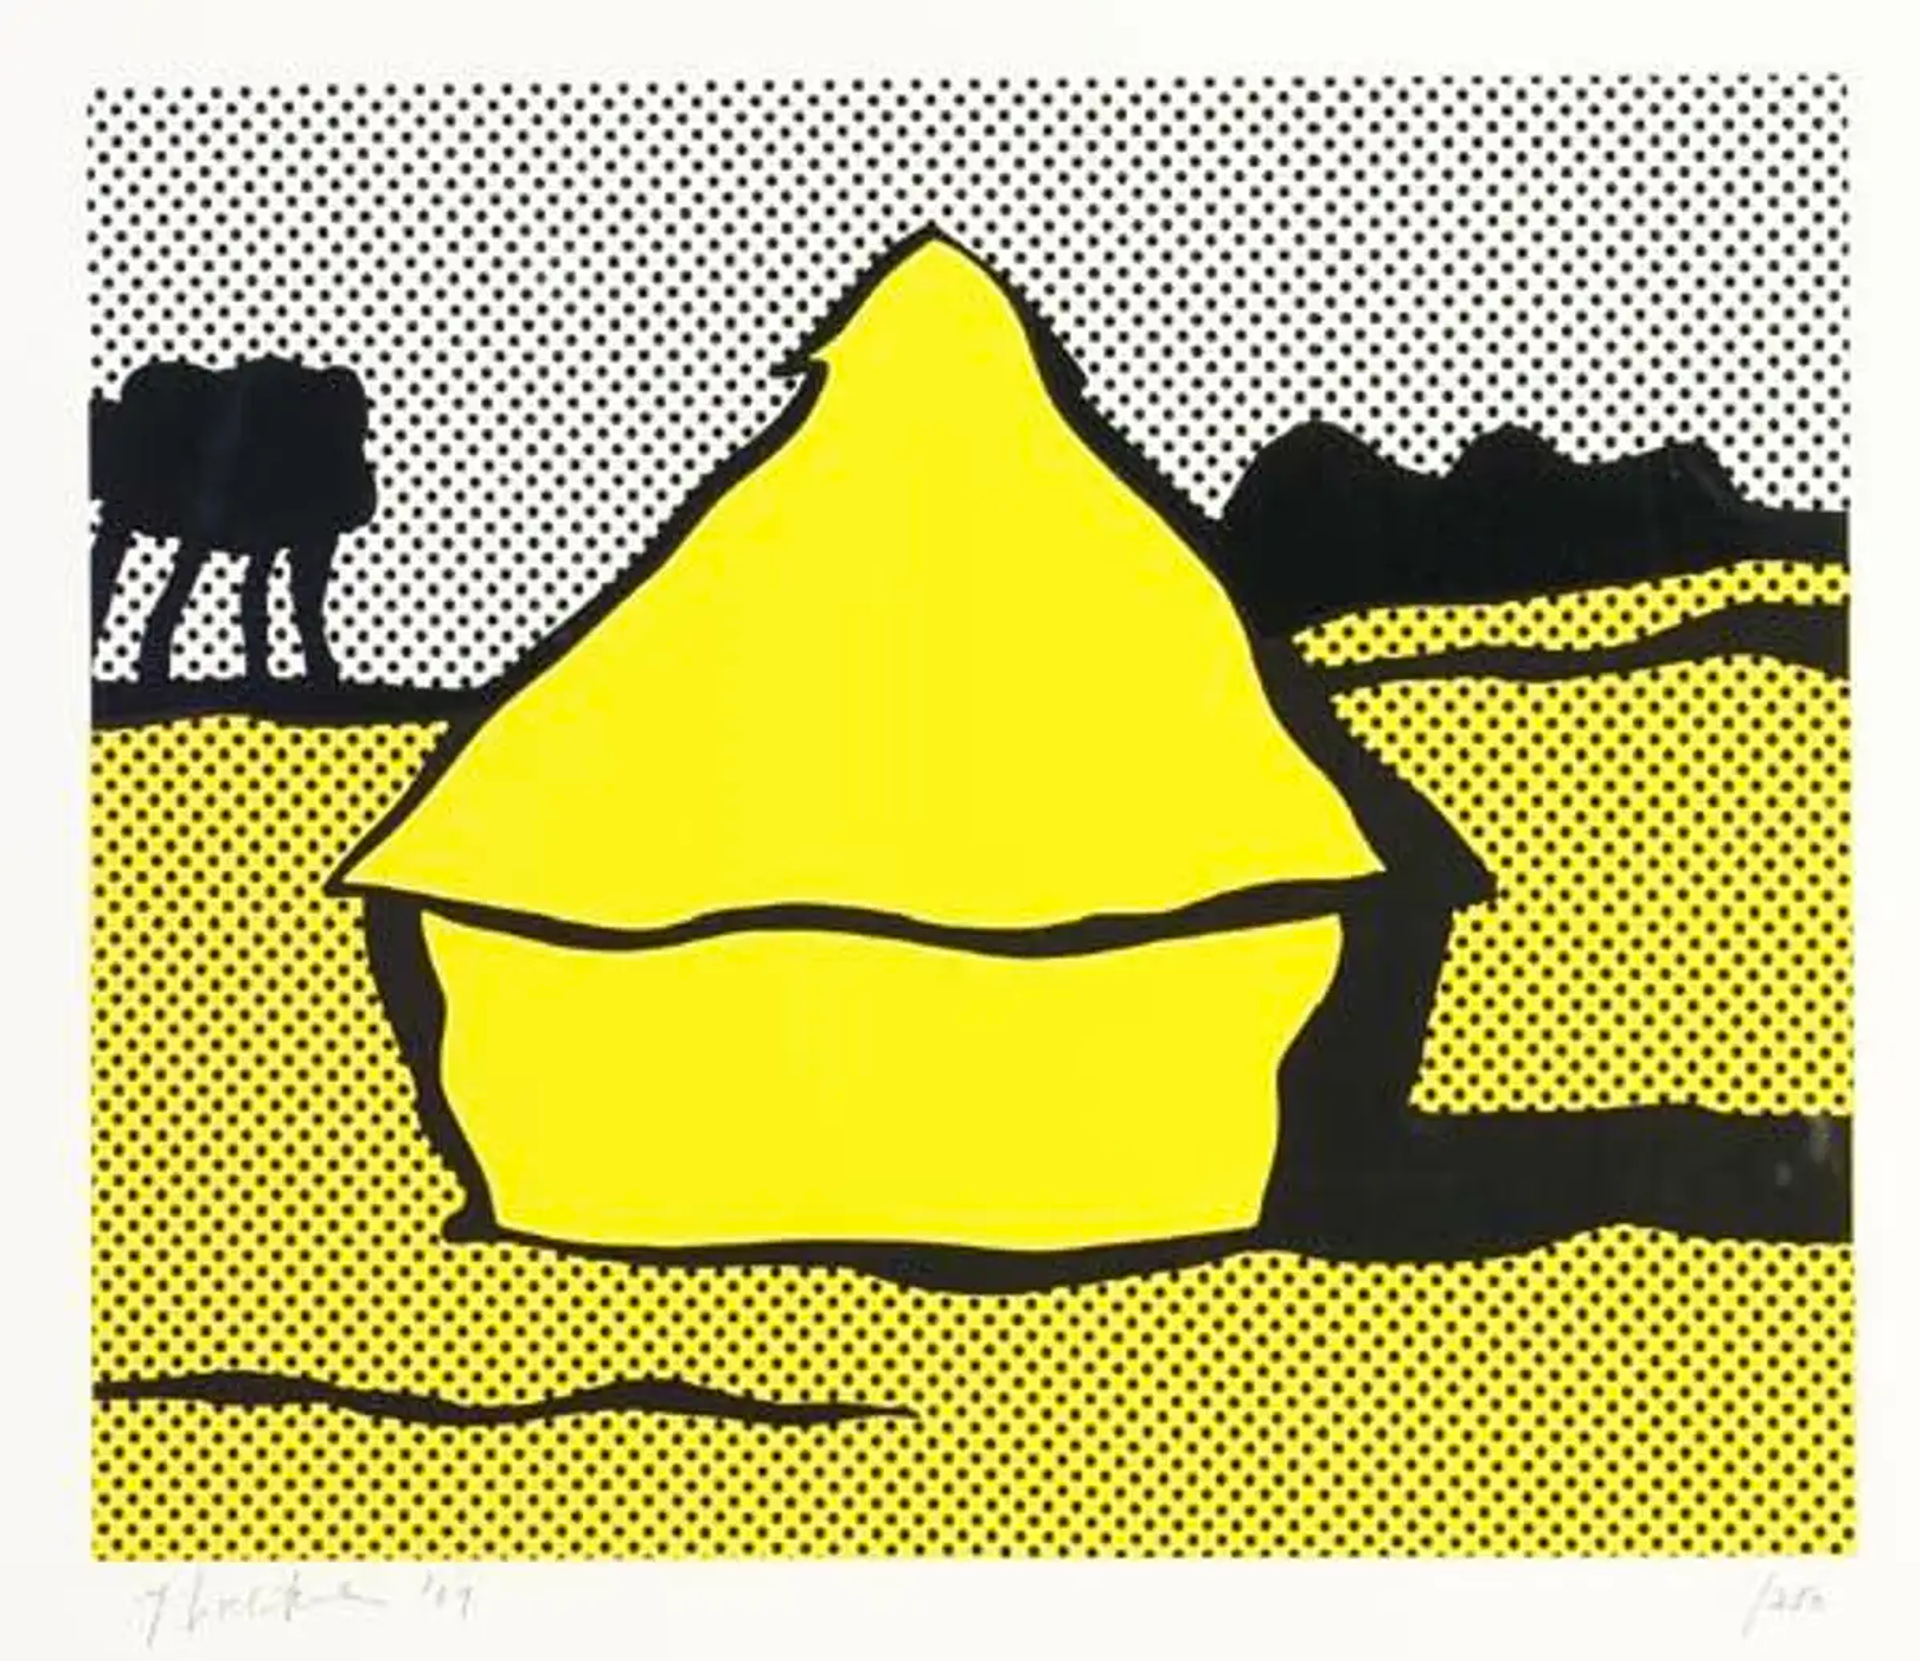 This image portrays a yellow stack of hay in the centre of the composition, and the main element in the middle is defined through thick black contouring. The backdrop of the print is densely populated by strategically positioned dots, thrusting the simplified comic book rendition of the haystack to the foreground of the work.